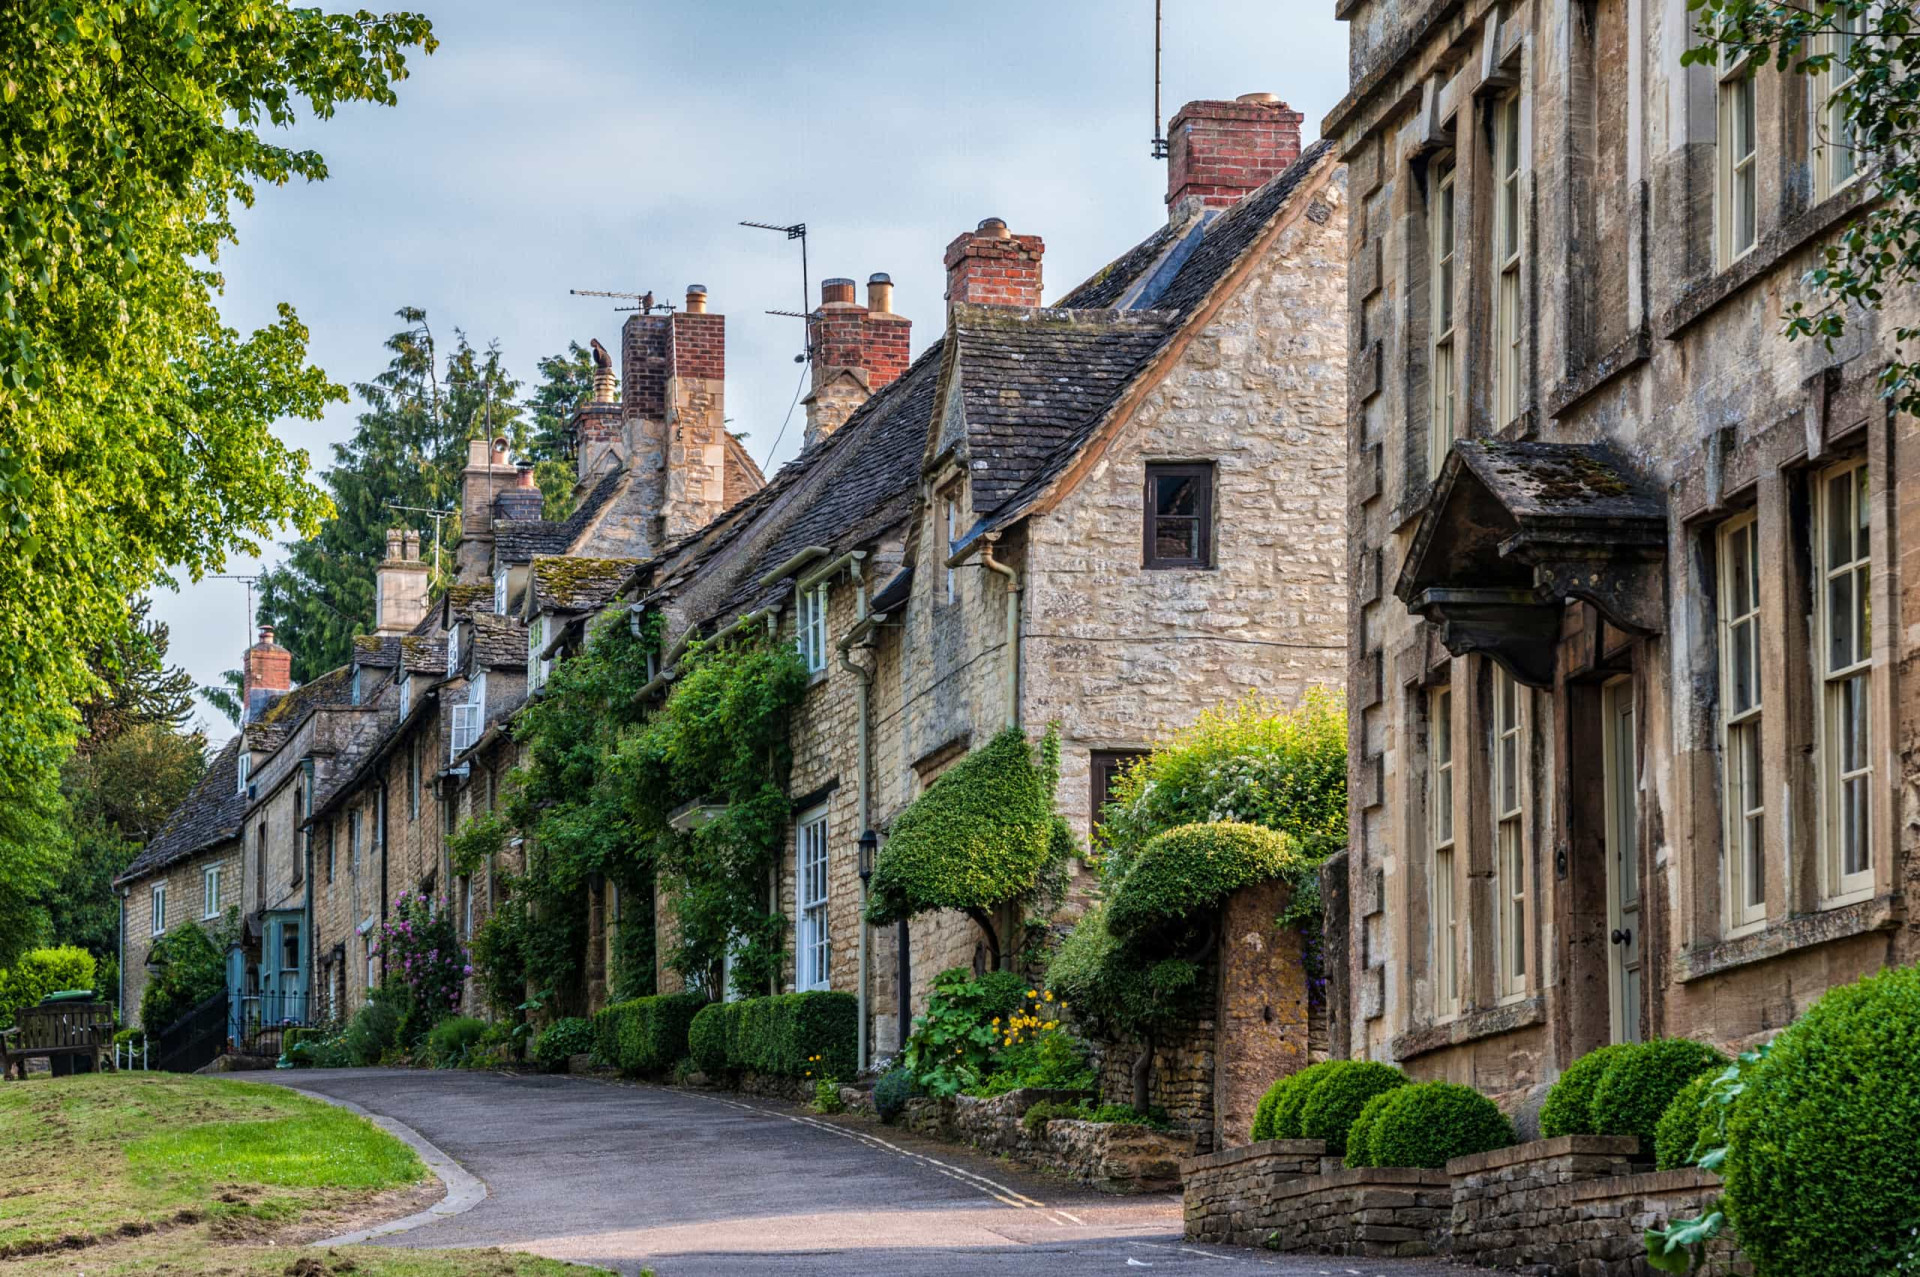 <p>The Cotswolds always delivers when it comes to charming towns. All of the buildings are from the Georgian era–some have tiled roofs and some are thatched. There are some great tea rooms in Burford, Oxfordshire for a delicious afternoon scone.</p><p>You may also like:<a href="https://www.starsinsider.com/n/269804?utm_source=msn.com&utm_medium=display&utm_campaign=referral_description&utm_content=471299v4en-en"> Surprising foods you thought were vegetarian but really aren't</a></p>